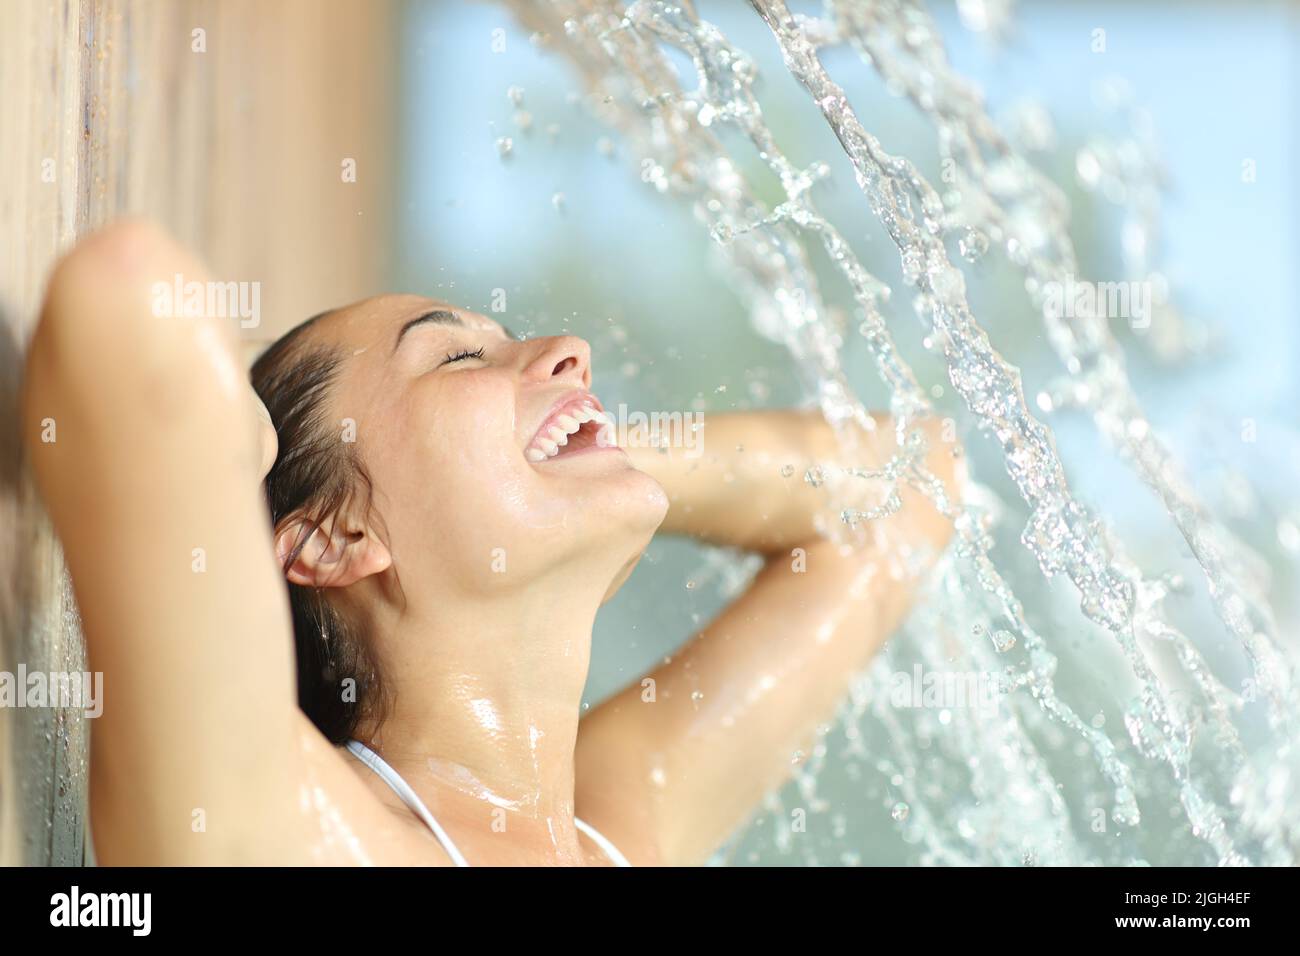 Happy woman enjoying and laughing under water jet in spa Stock Photo